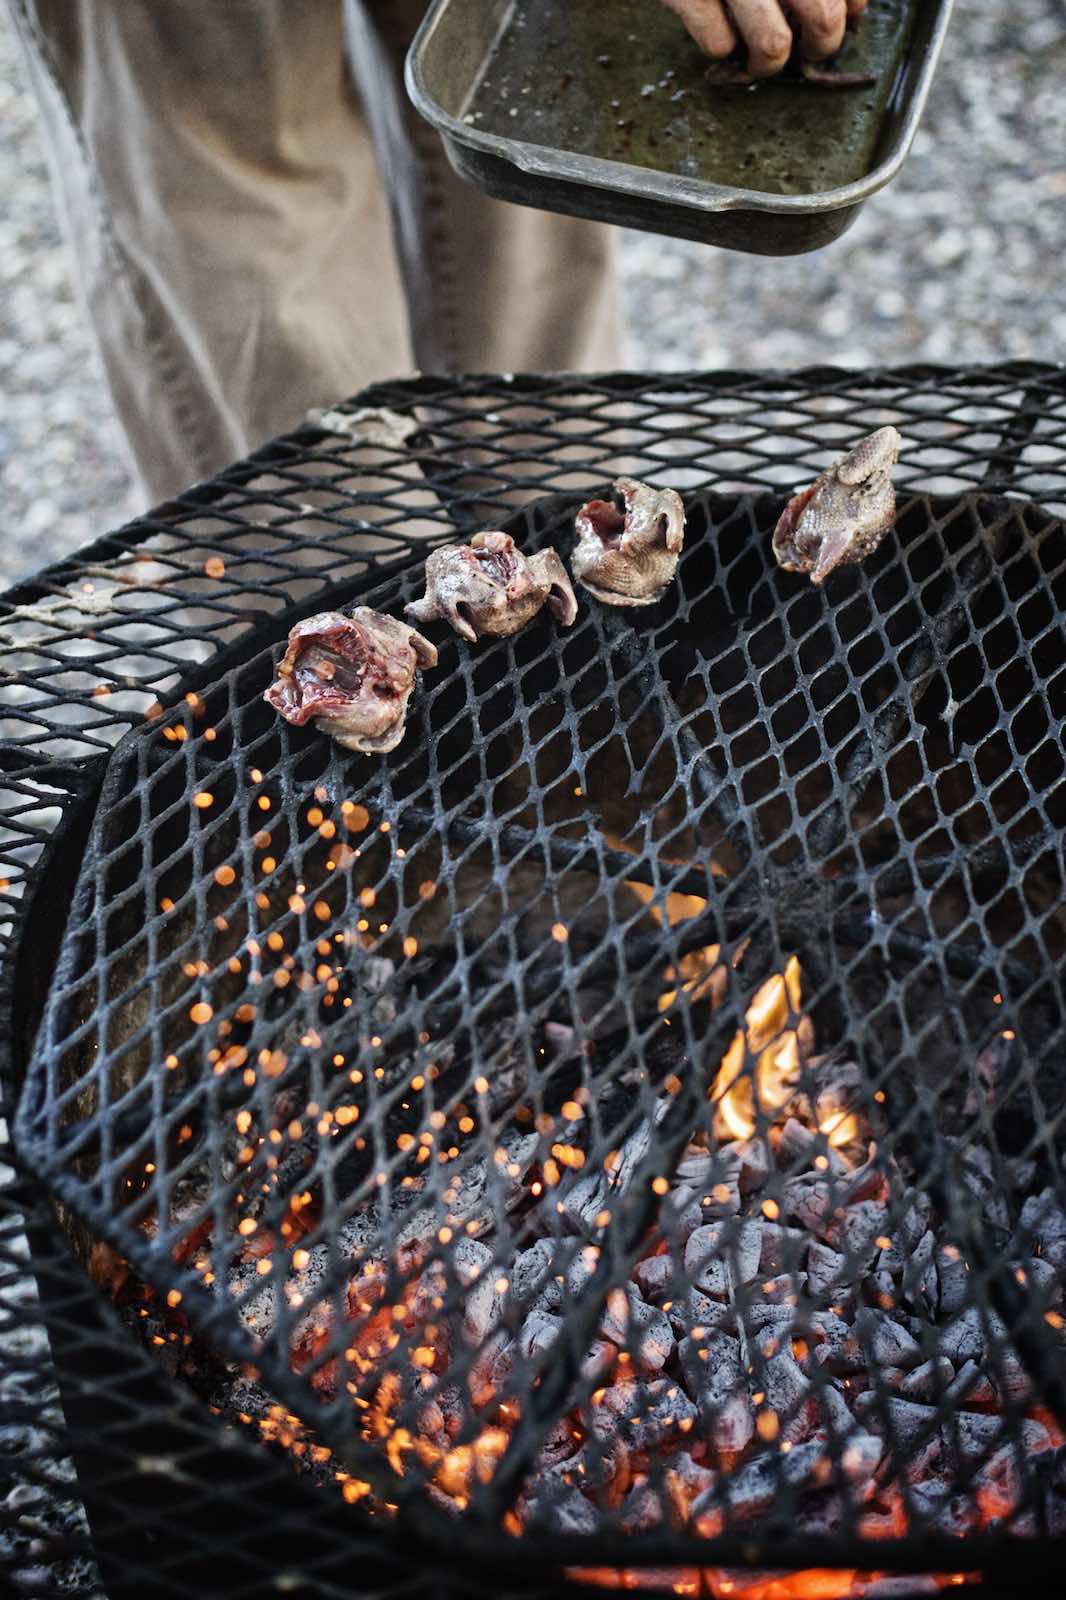 Jody Horton Photography - Doves cooking on a charcoal grill. 